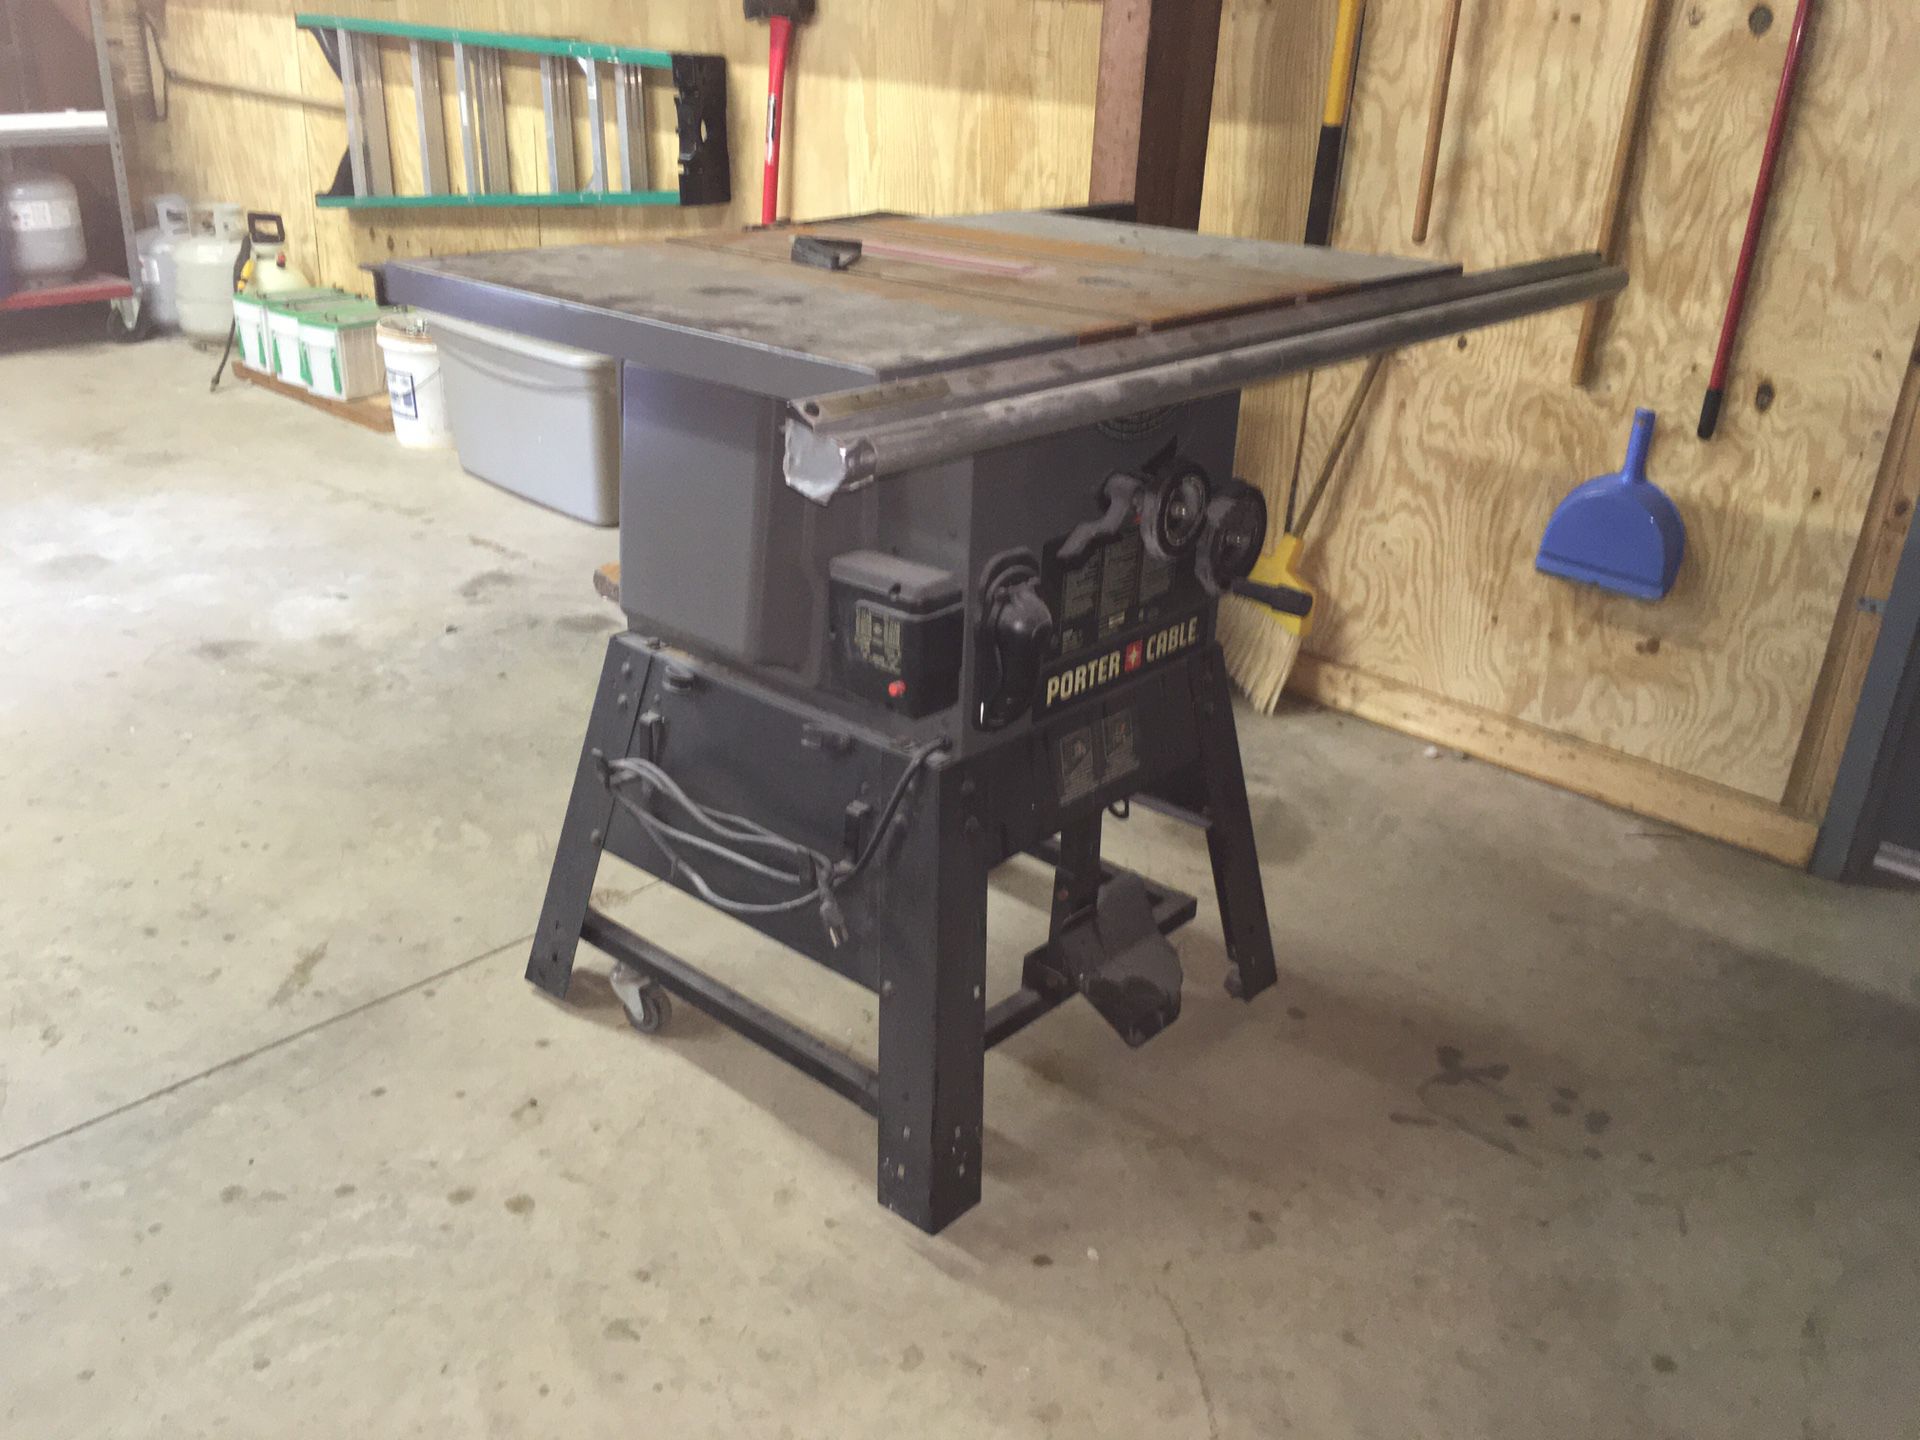 Large shop table saw / porter cable